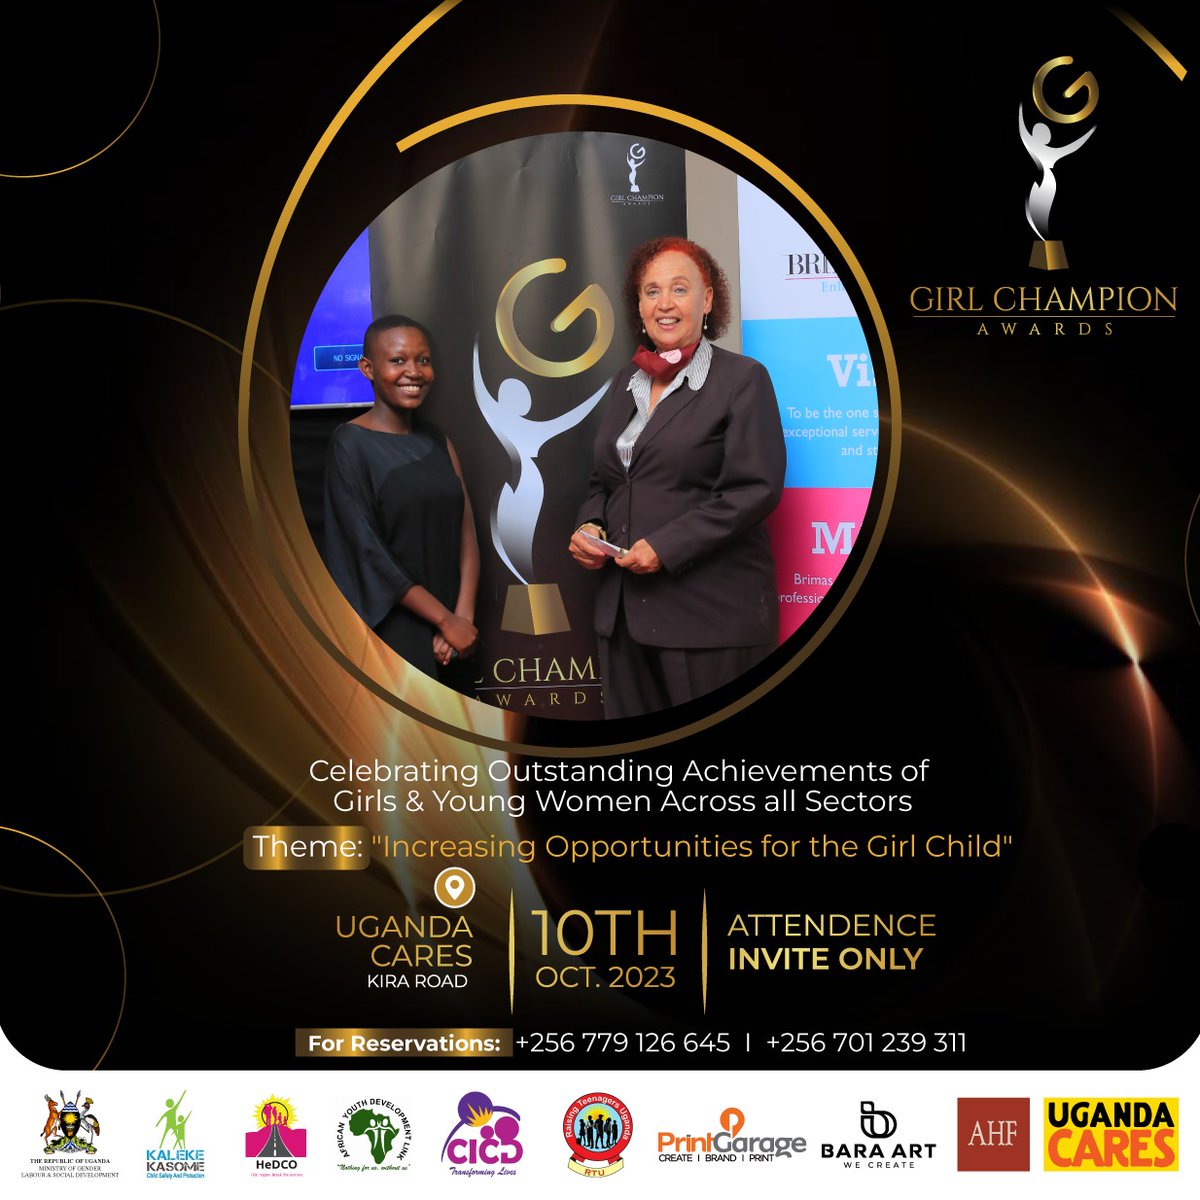 Celebrating International Day of the Girl Child 2023 with the @GirlChampionAwards in October! Recognizing inspiring Girl Champions who are transforming society and making a difference! Stay tuned for more updates✍️